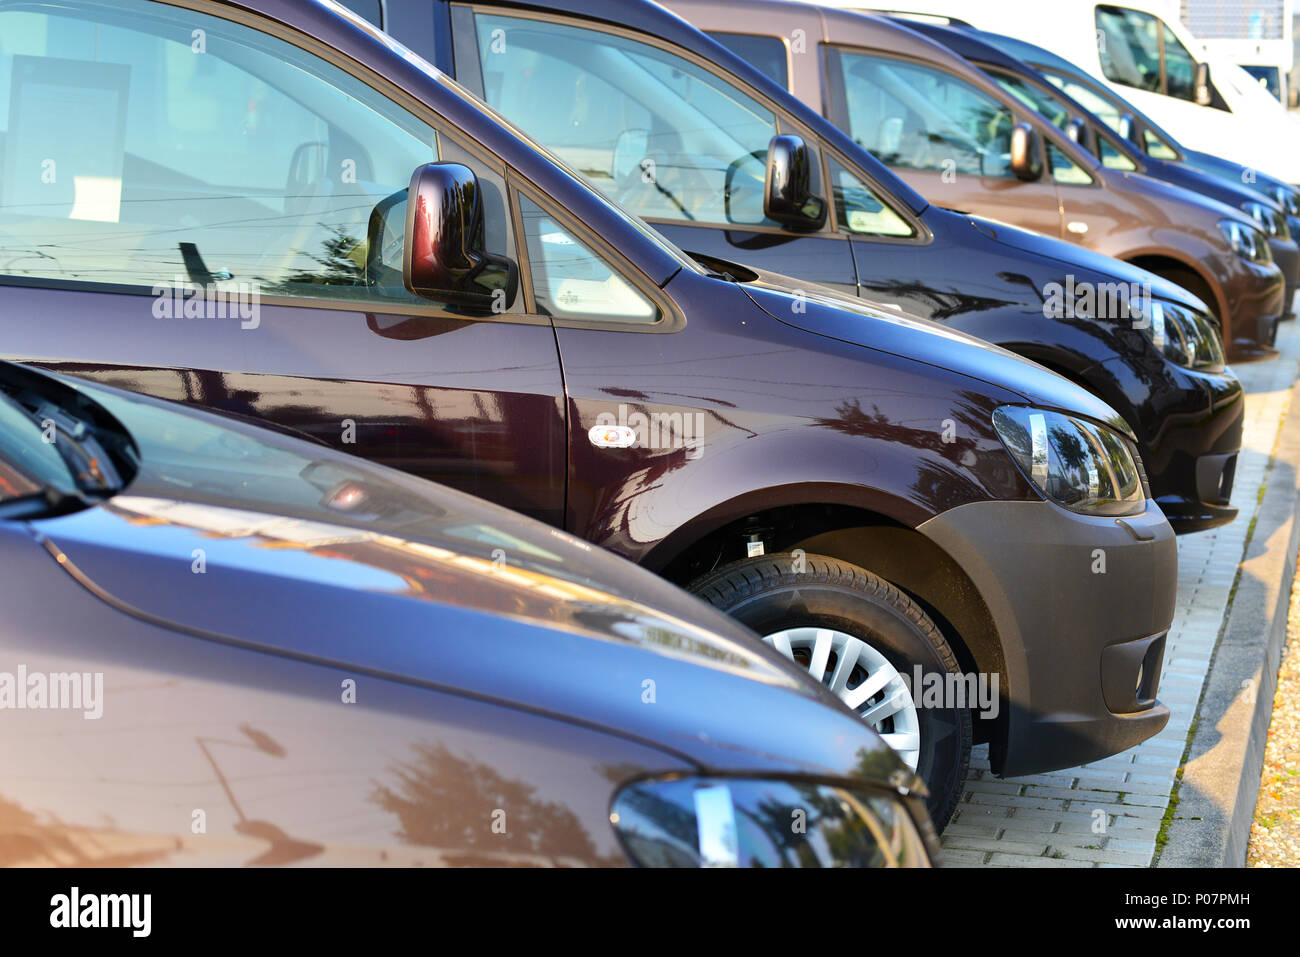 car dealership - many vehicles parked for sale in a row Stock Photo